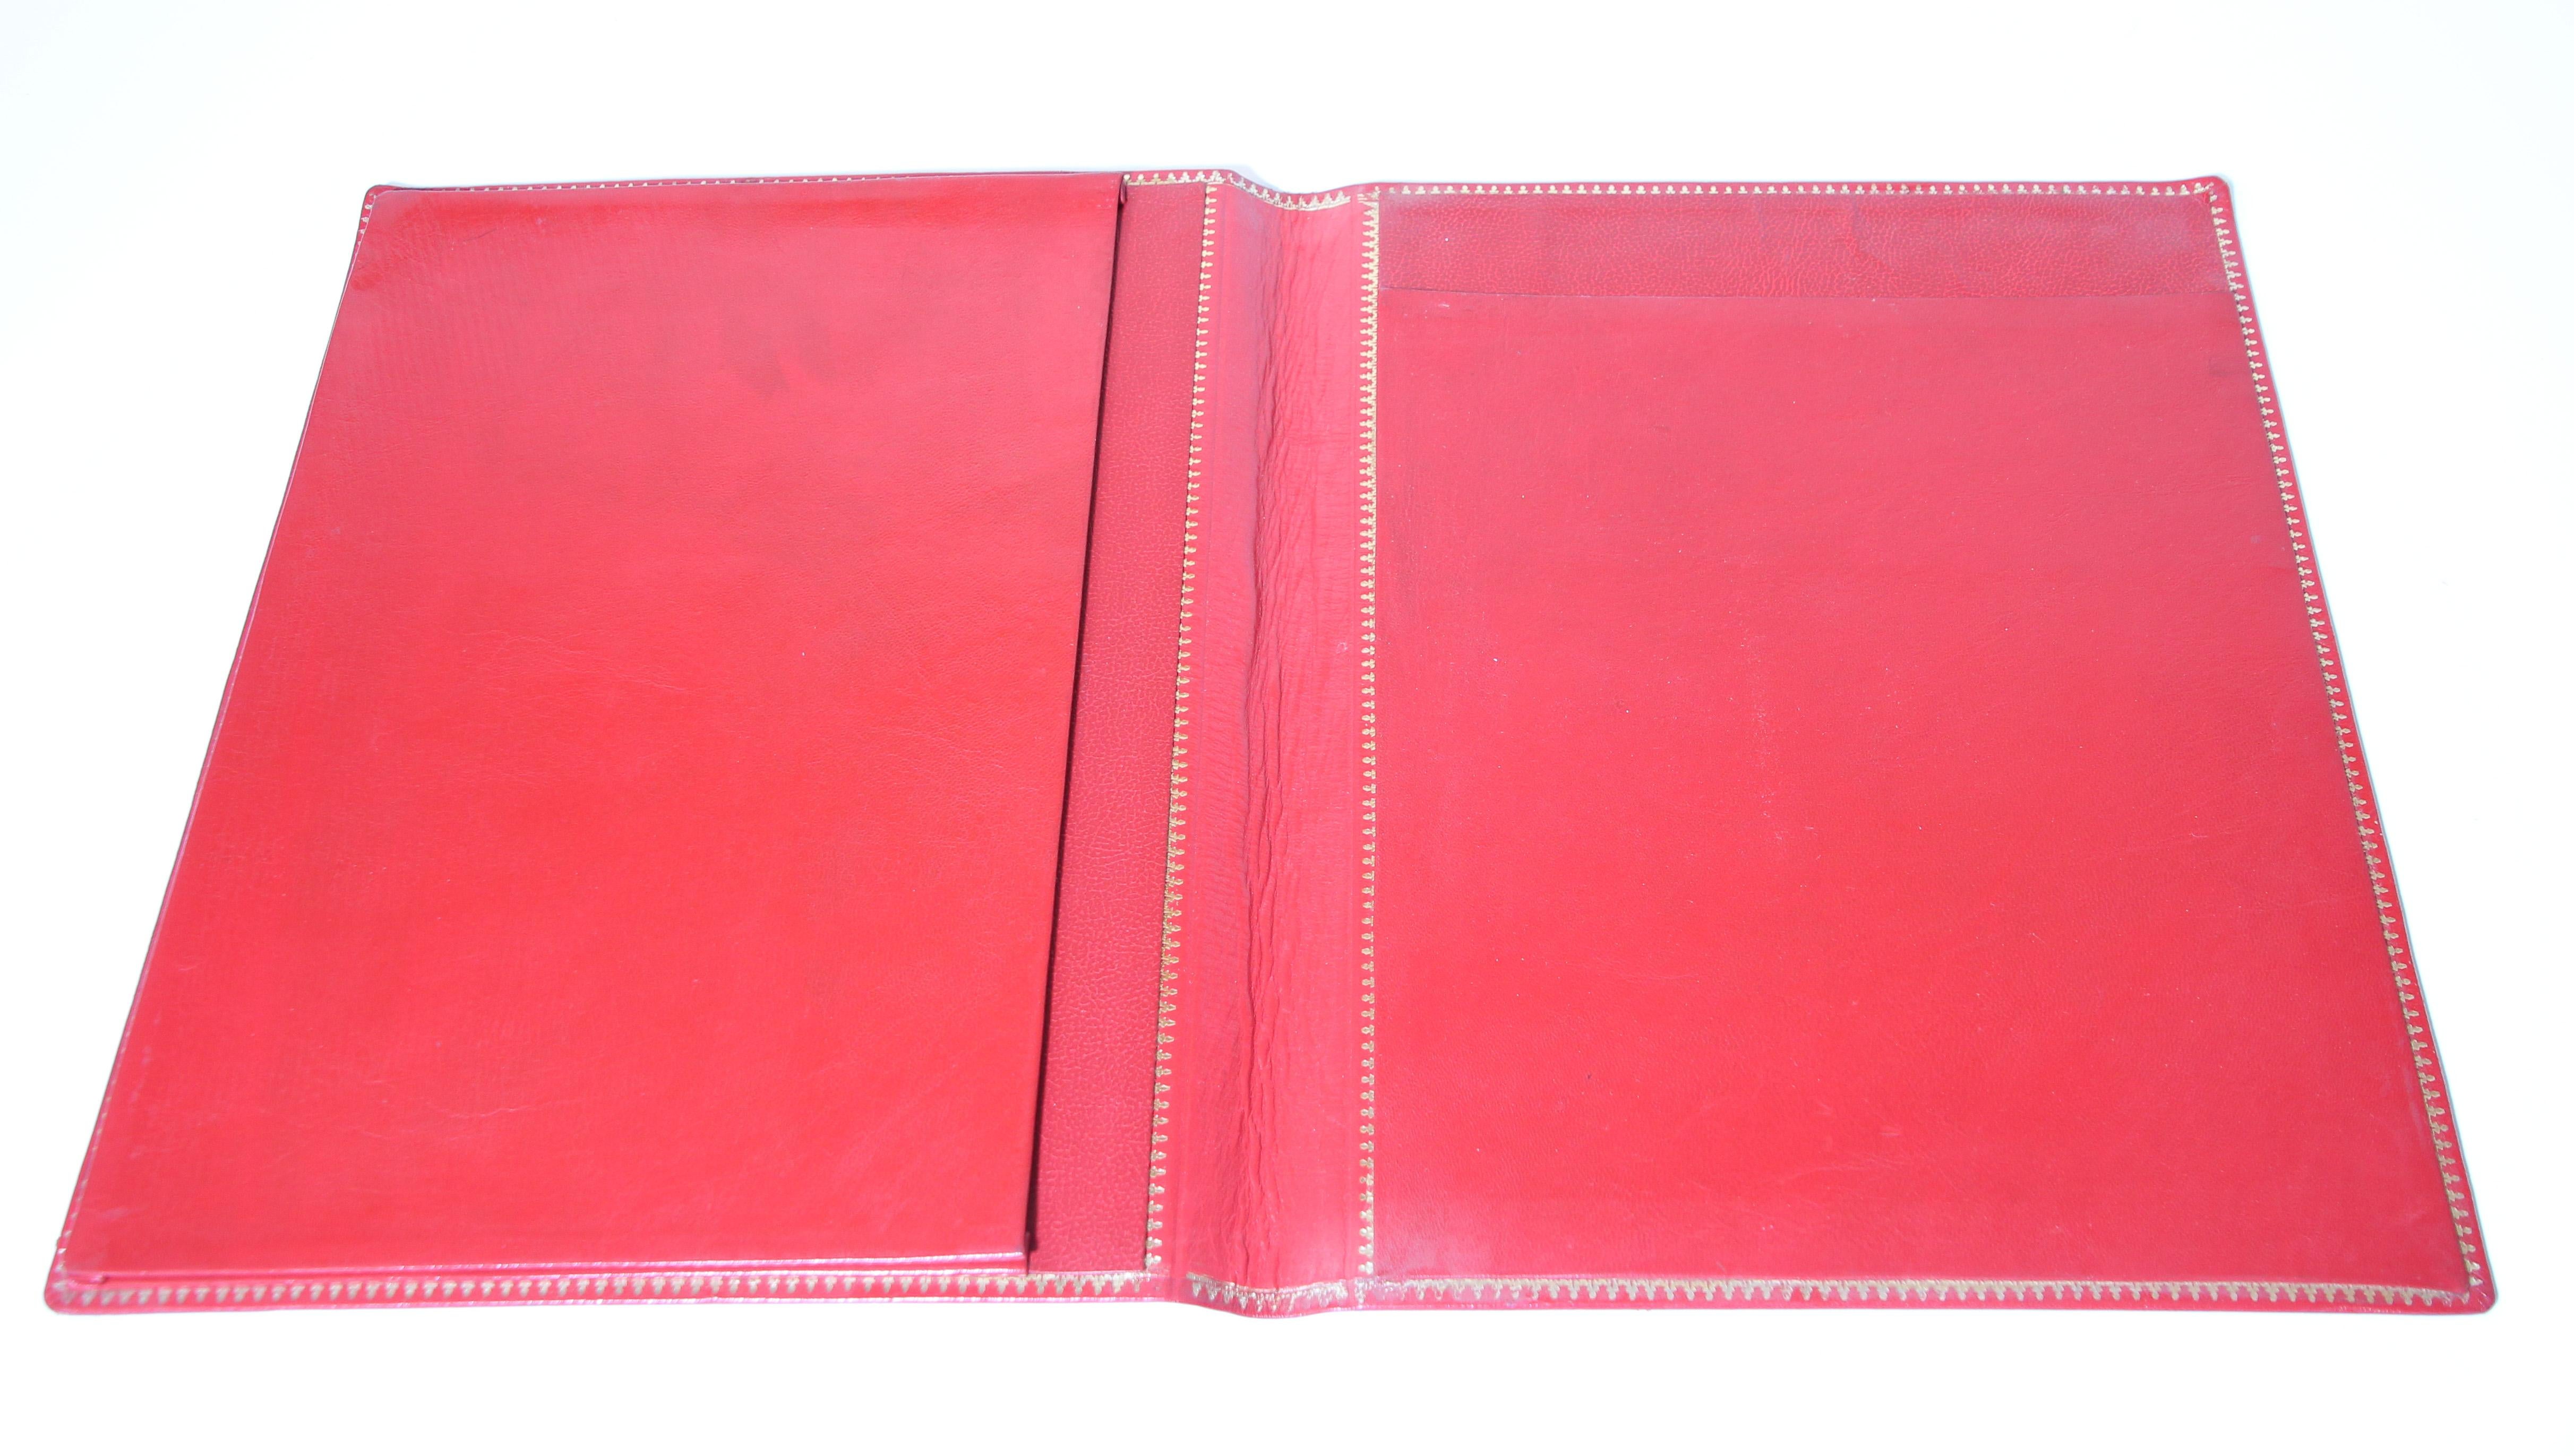 Vintage Moroccan Embossed Leather Padfolio In Good Condition For Sale In North Hollywood, CA